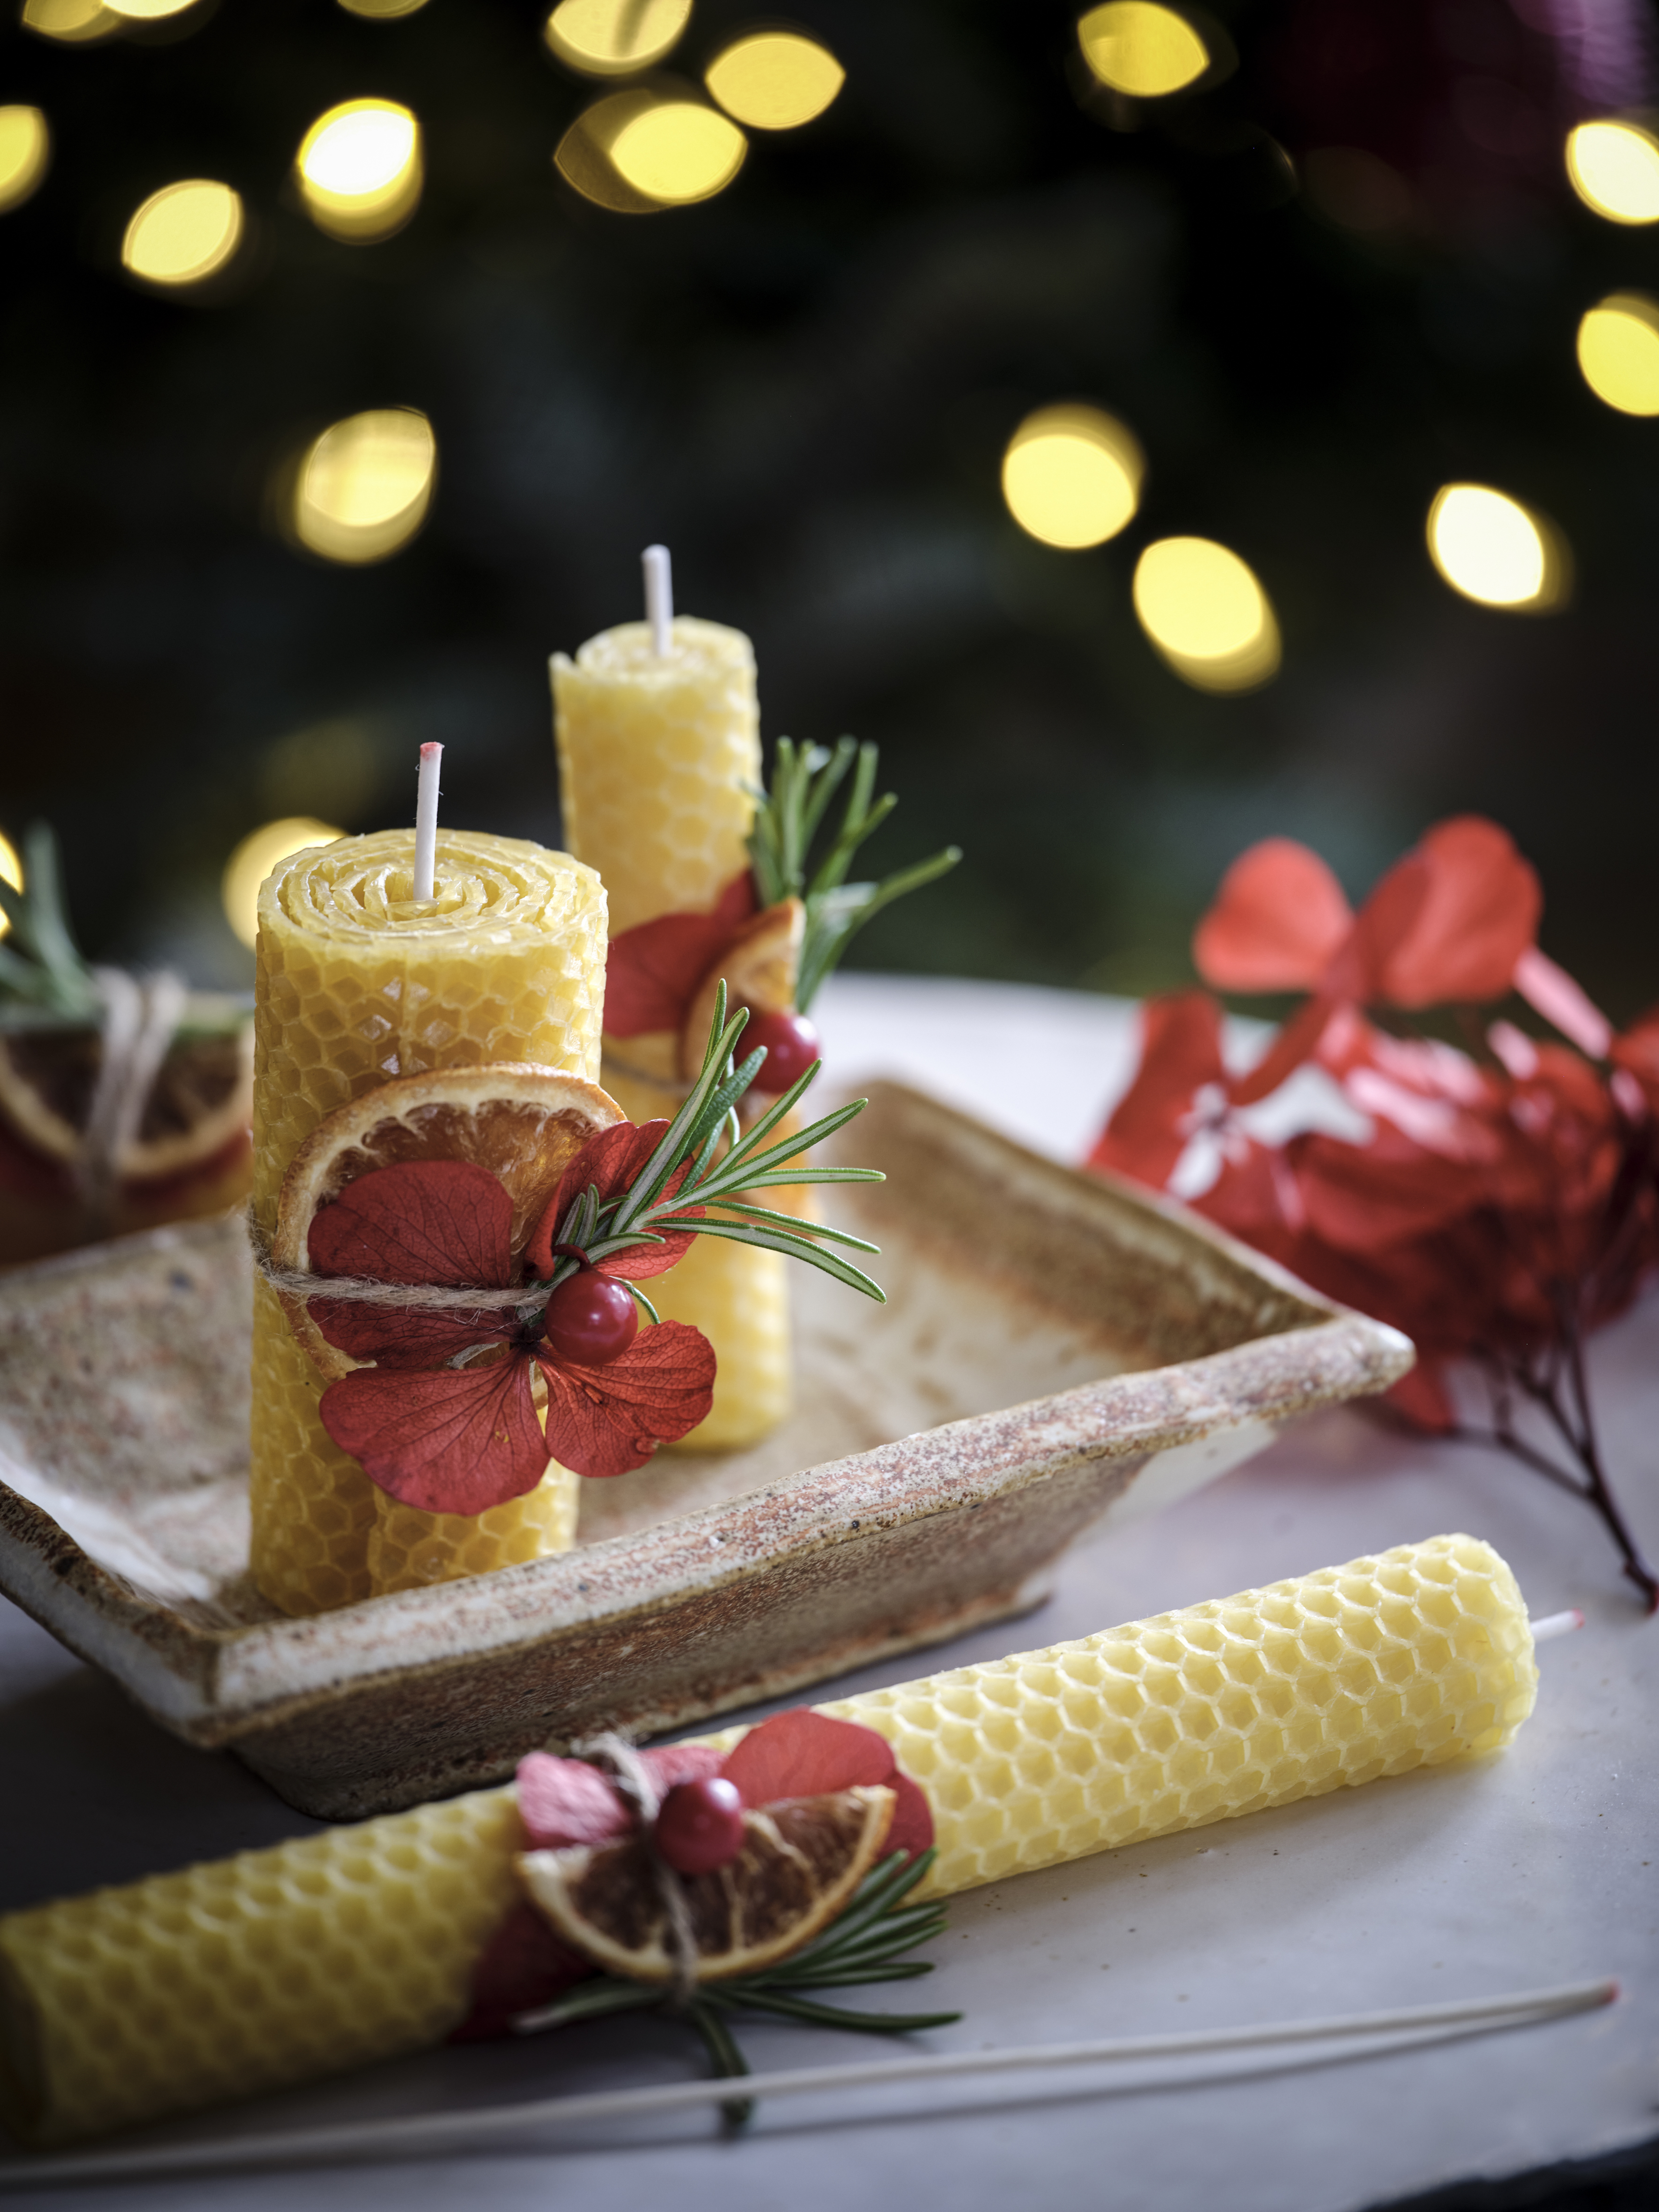 How to make beeswax candles: the easiest to tackle for beginners